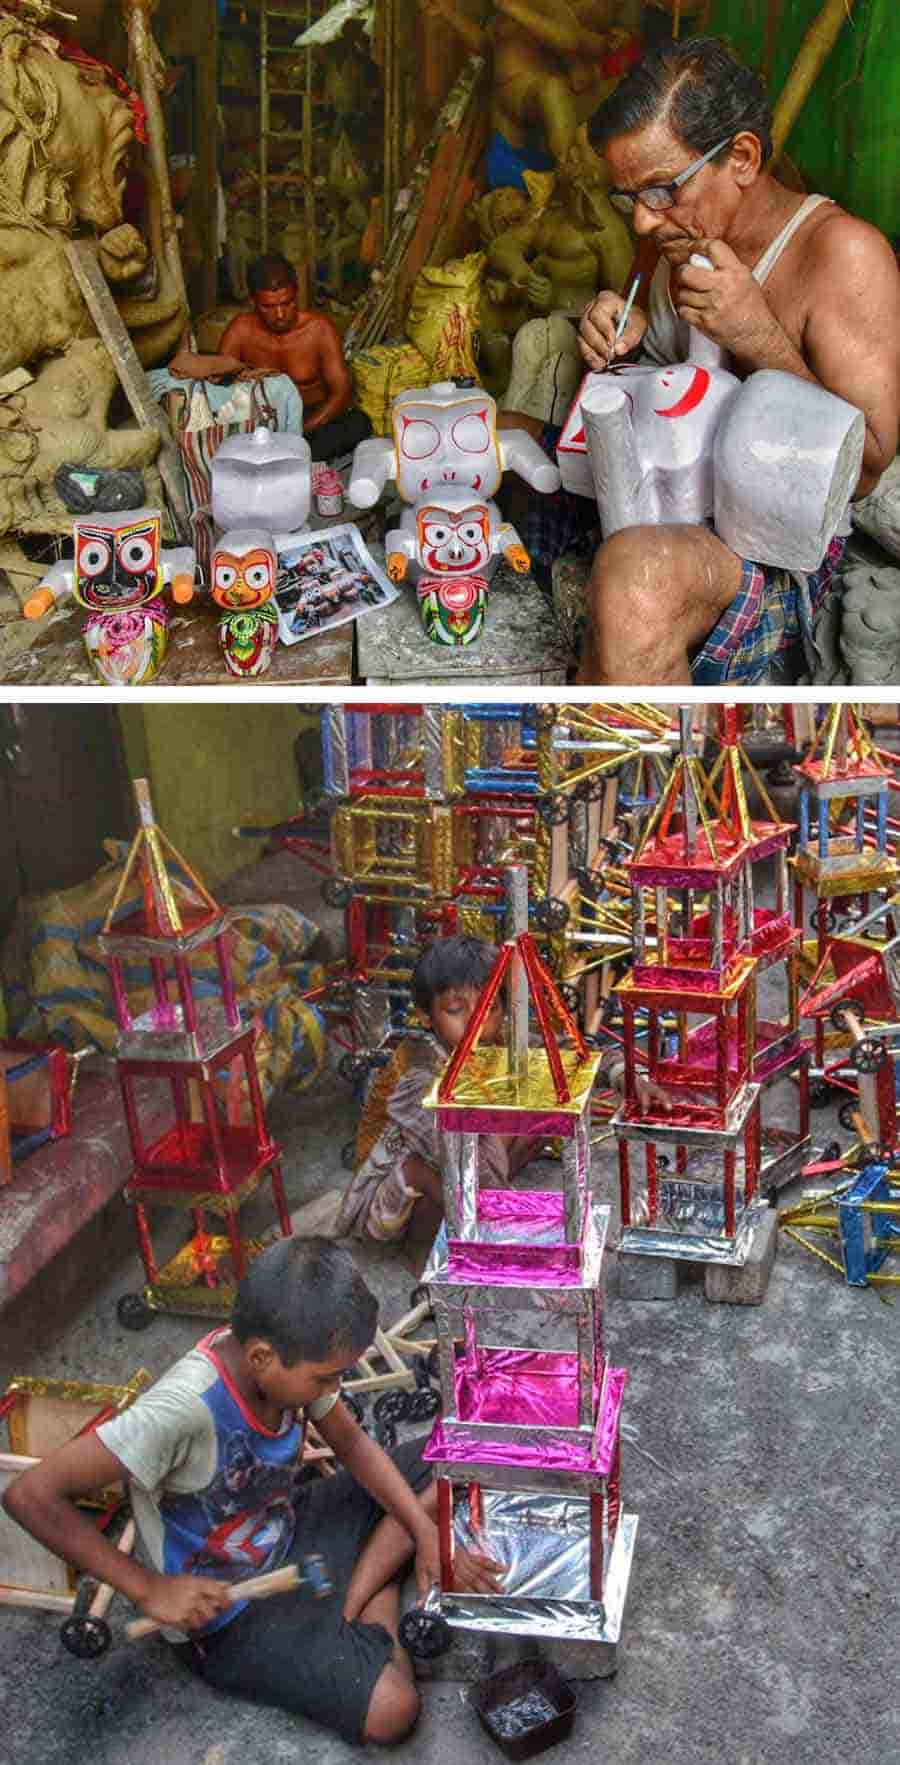 Ahead of Rath Yatra, an artist is seen adding finishing touches to idols of Lord Jaganath. Small raths are also being readied for the festival on June 20  